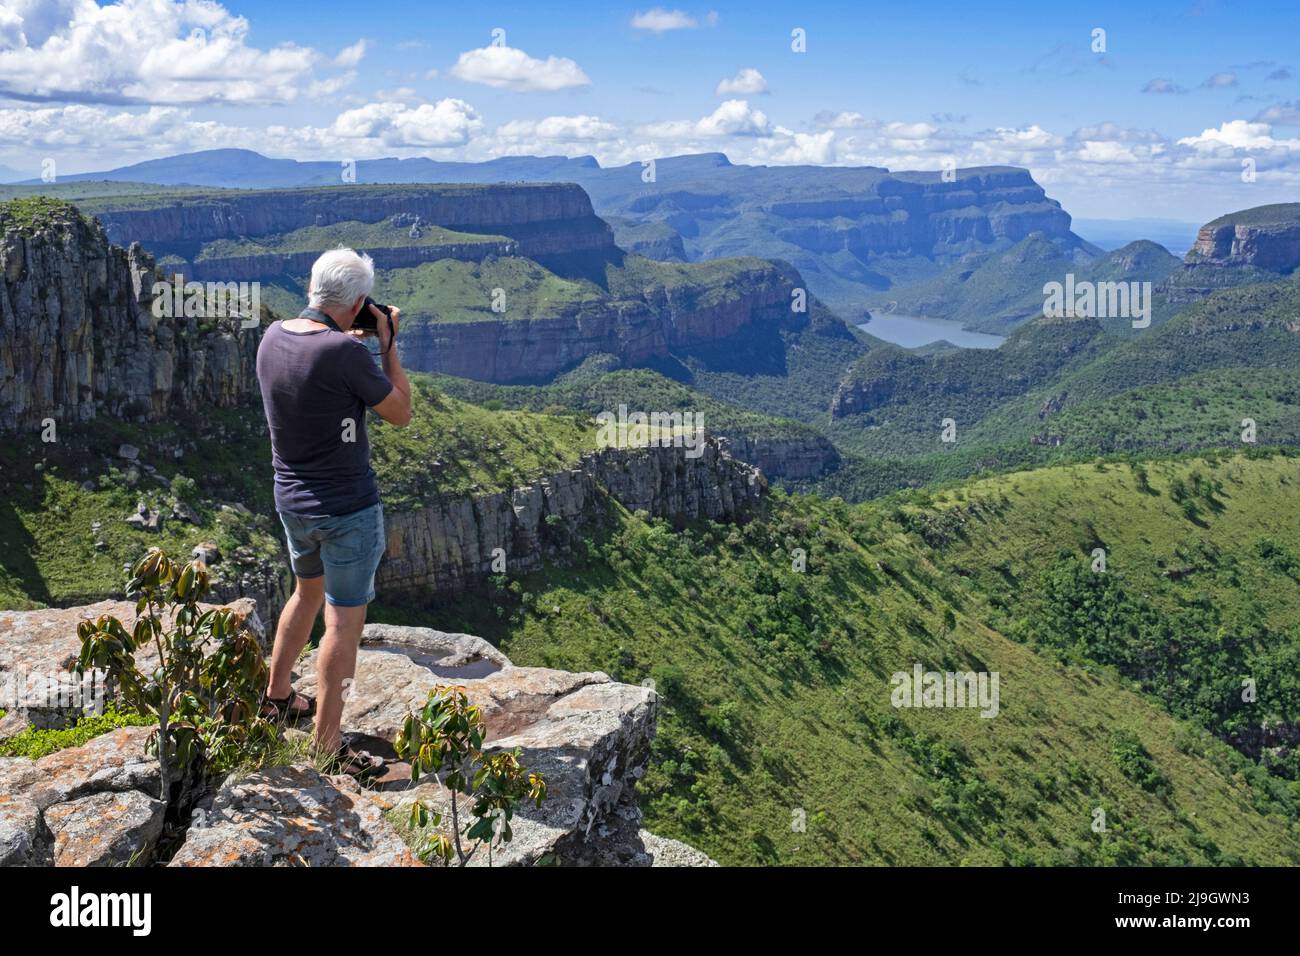 Western tourist at Lowveld viewpoint looking over the Blyde River Canyon / Blyderivierspoort, Mpumalanga province, South Africa Stock Photo